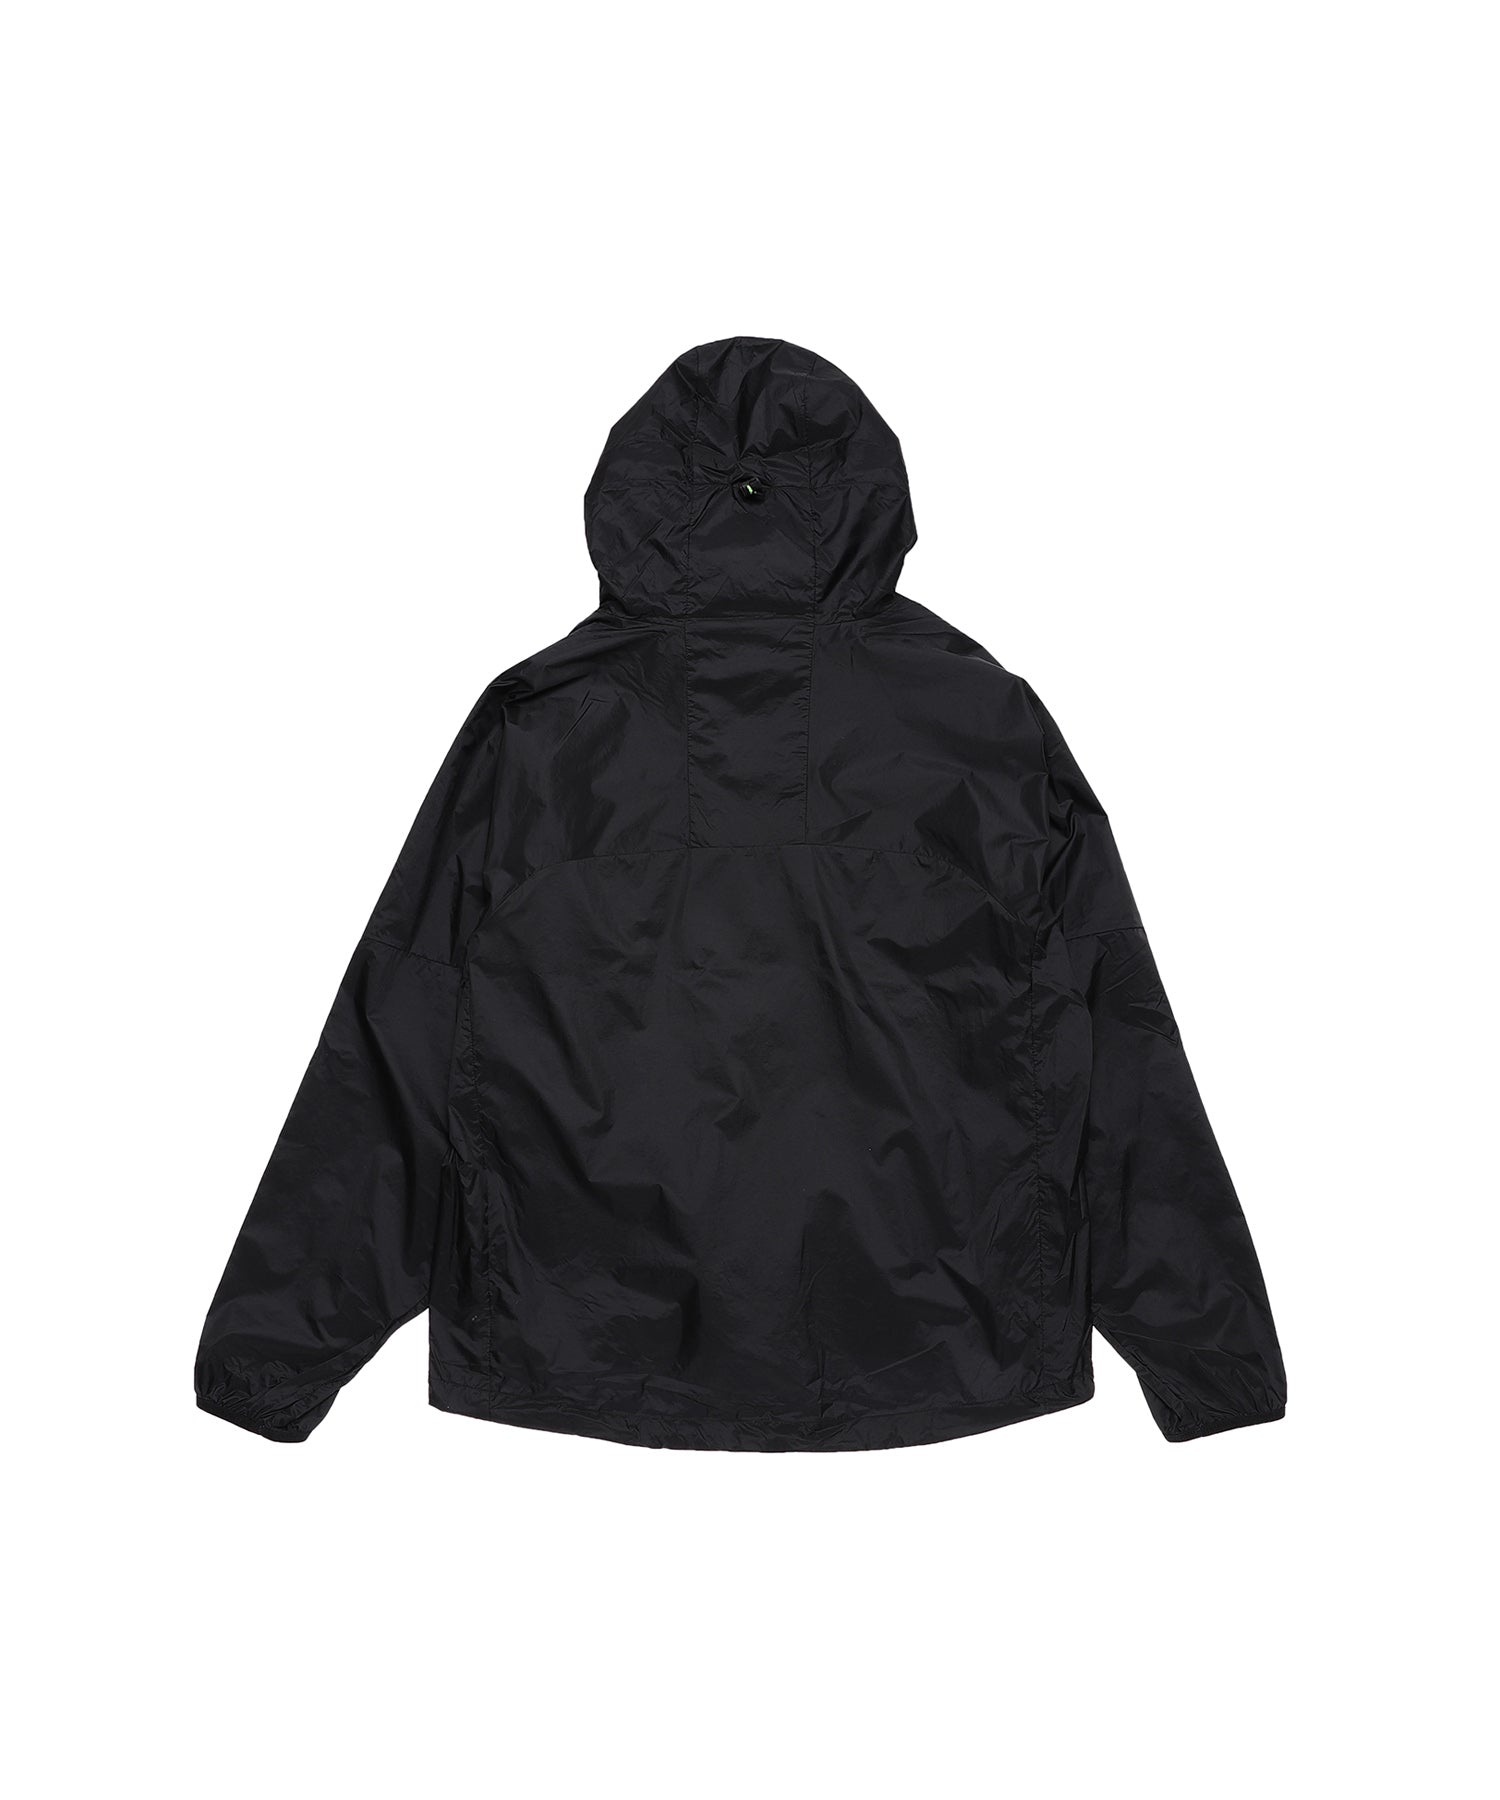 ACG Windproof Cindr Cone Hoodie Jacket - NIKE (ナイキ) - outer 